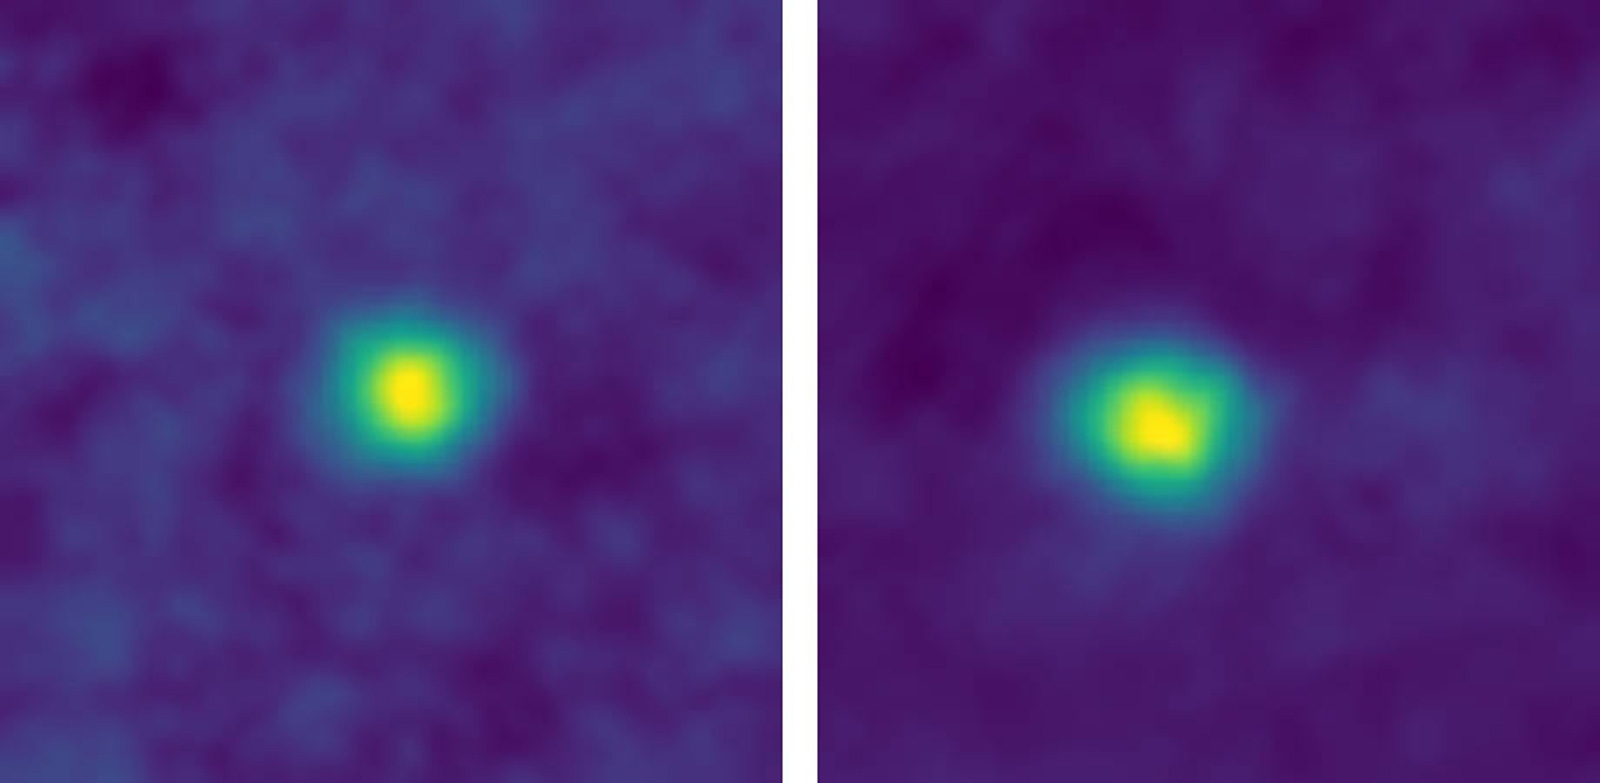 New Horizons probe captures images at record distance from Earth | DeviceDaily.com